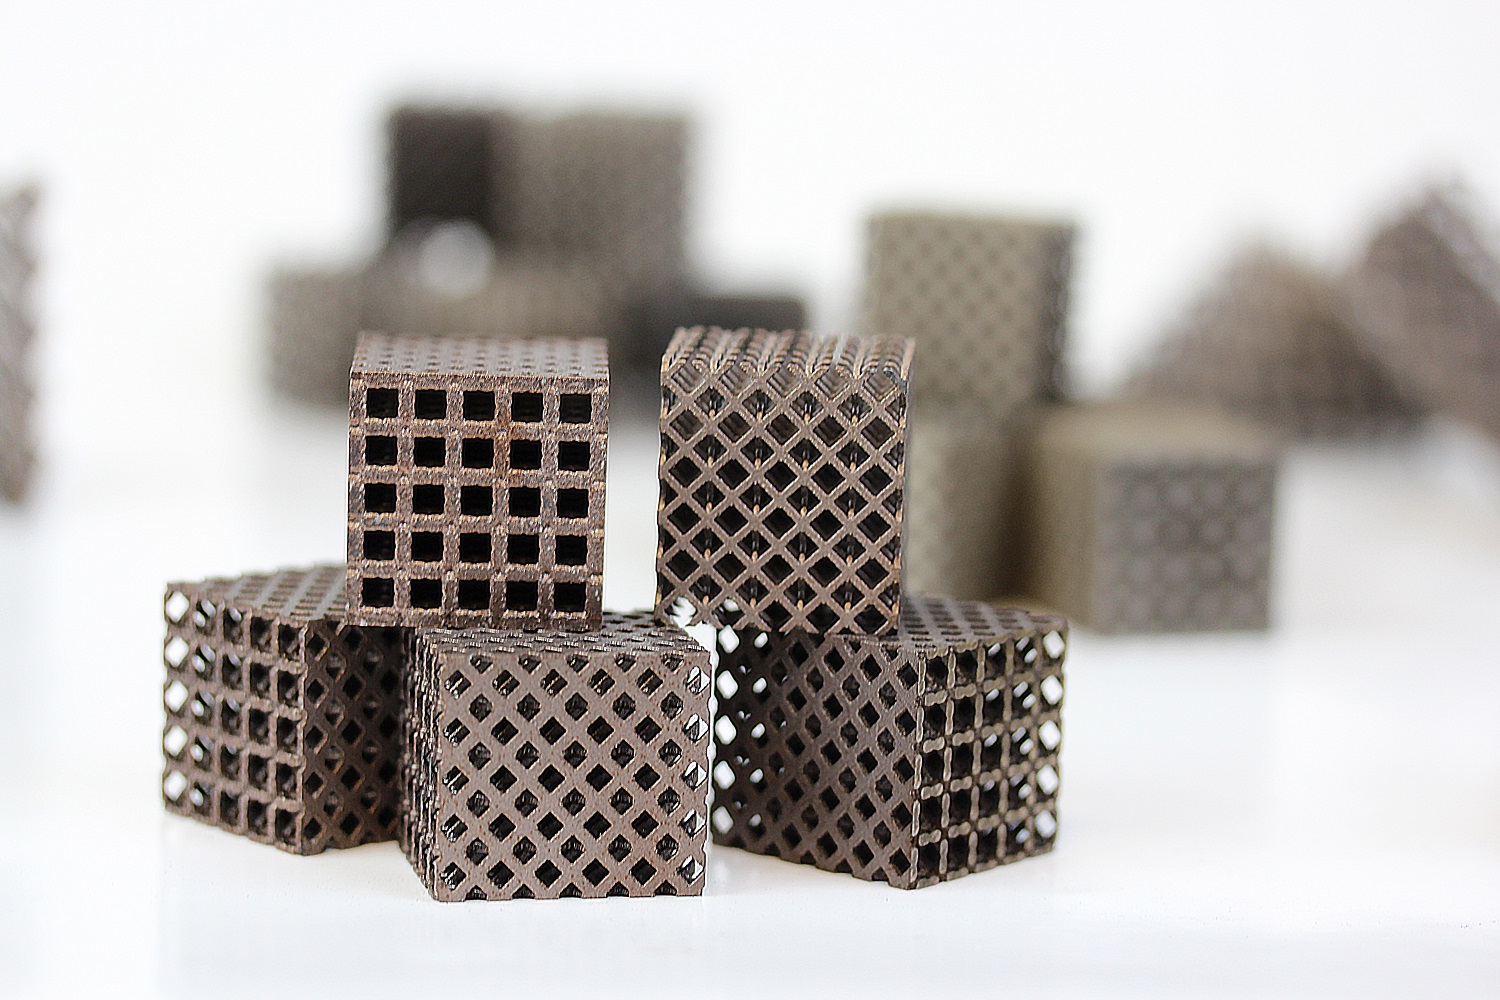 LIGHT has investigated the use of novel low-density lattice structures to support overhanging geometries and prevent deformation during printing.